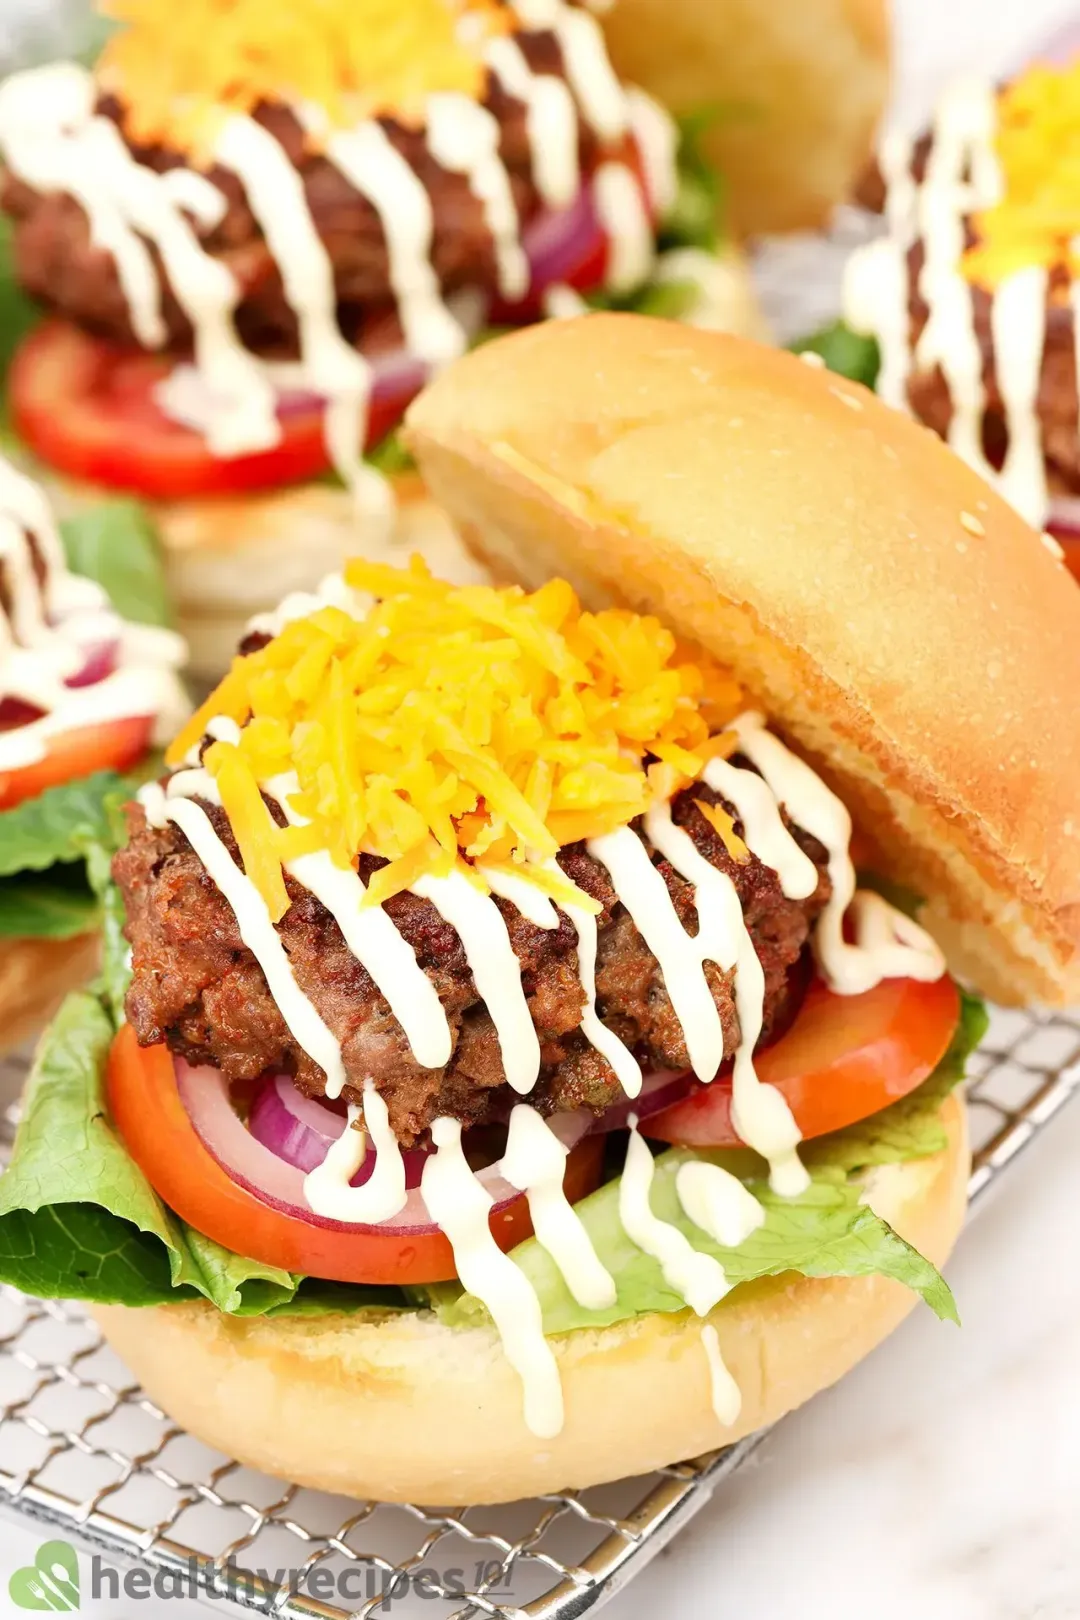 Beef Burger Recipe: Delicious, Restaurant-Style Dish With Little Effort